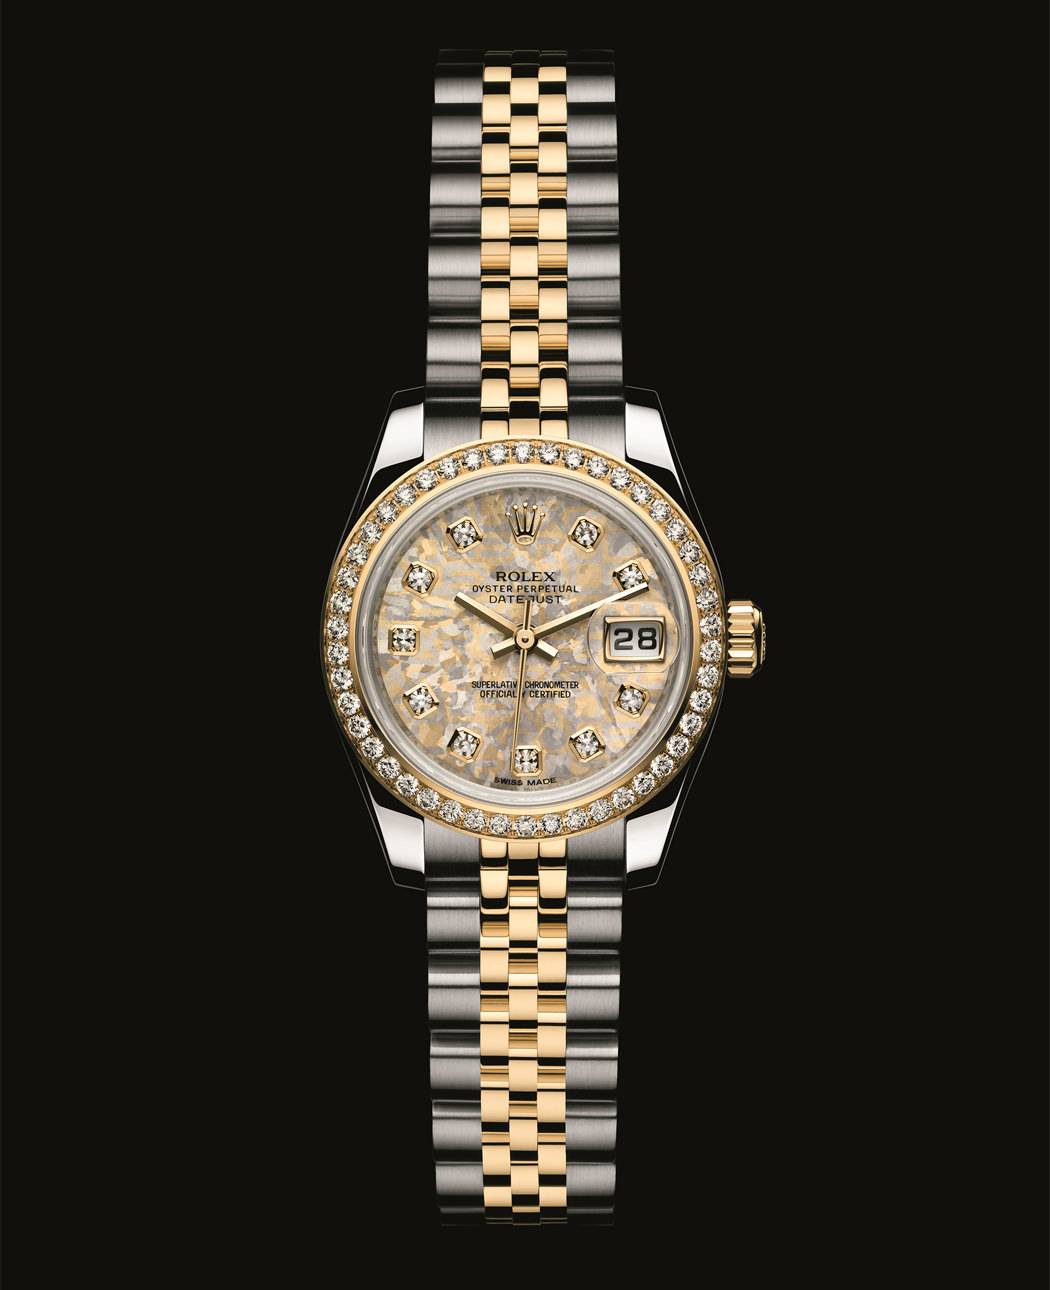 OYSTER PERPETUAL LADY-DATEJUST de Rolex